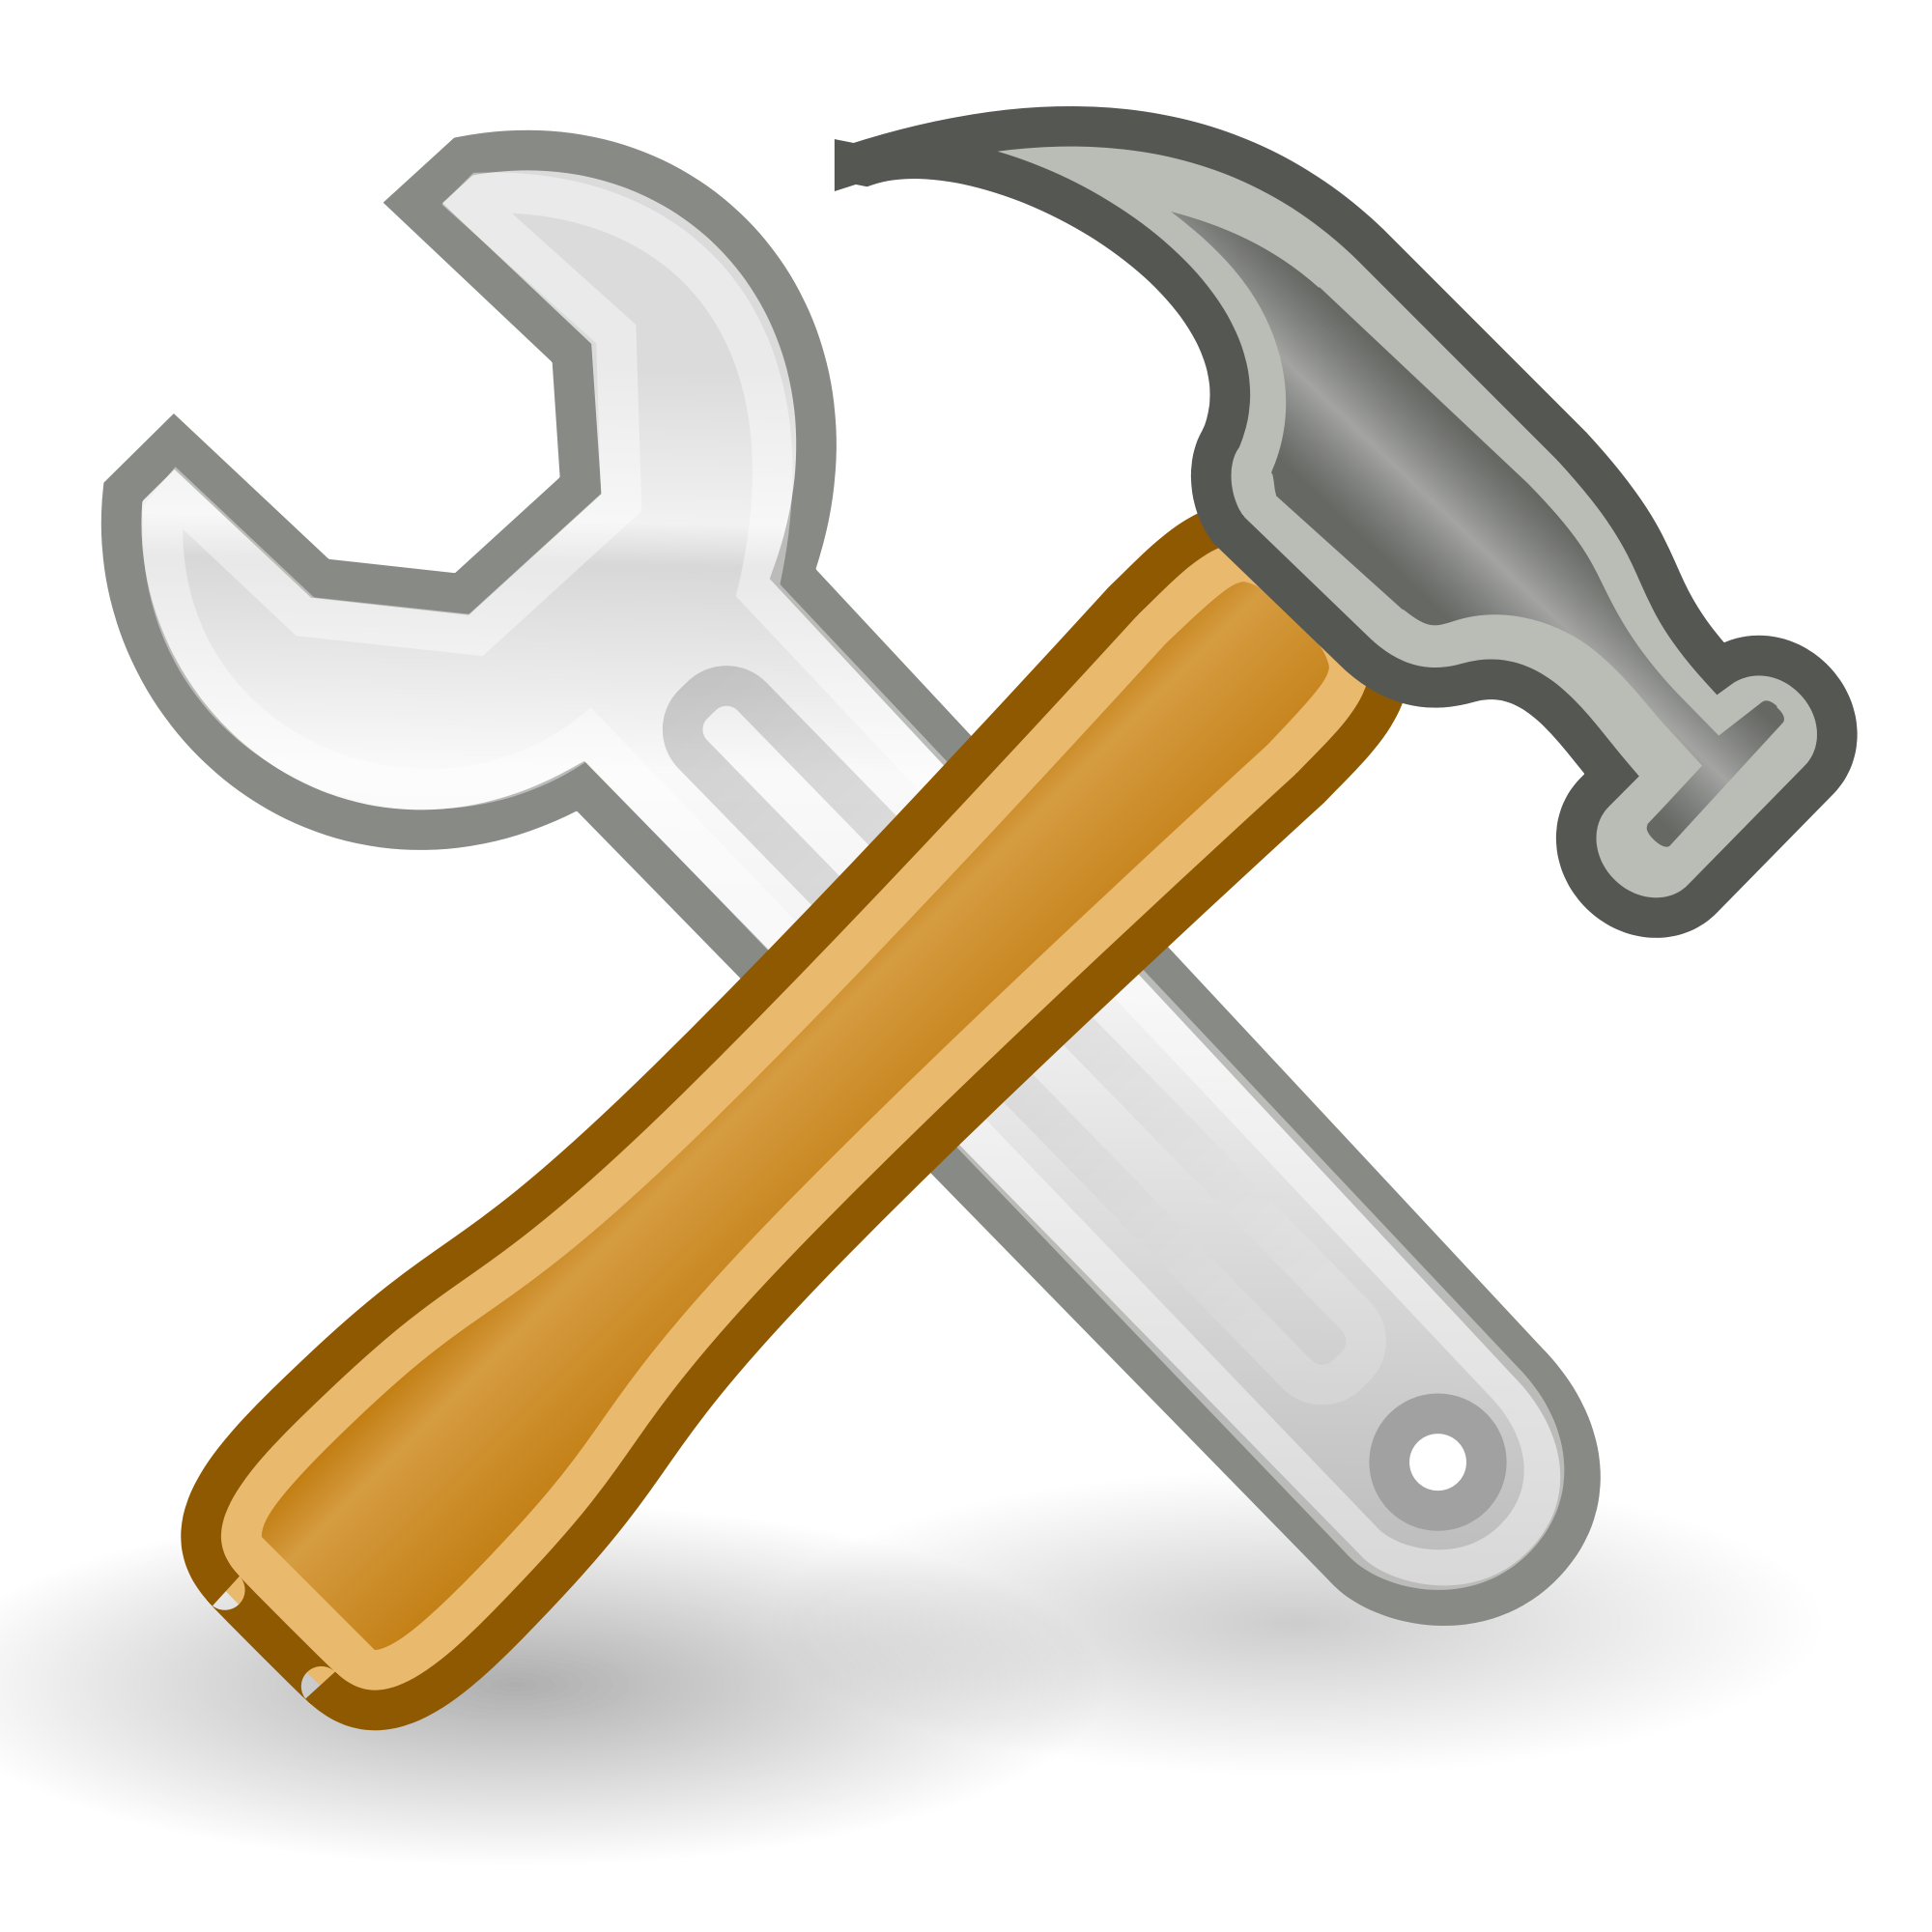 File:Tools-spanner-hammer.svg - Wikimedia Commons